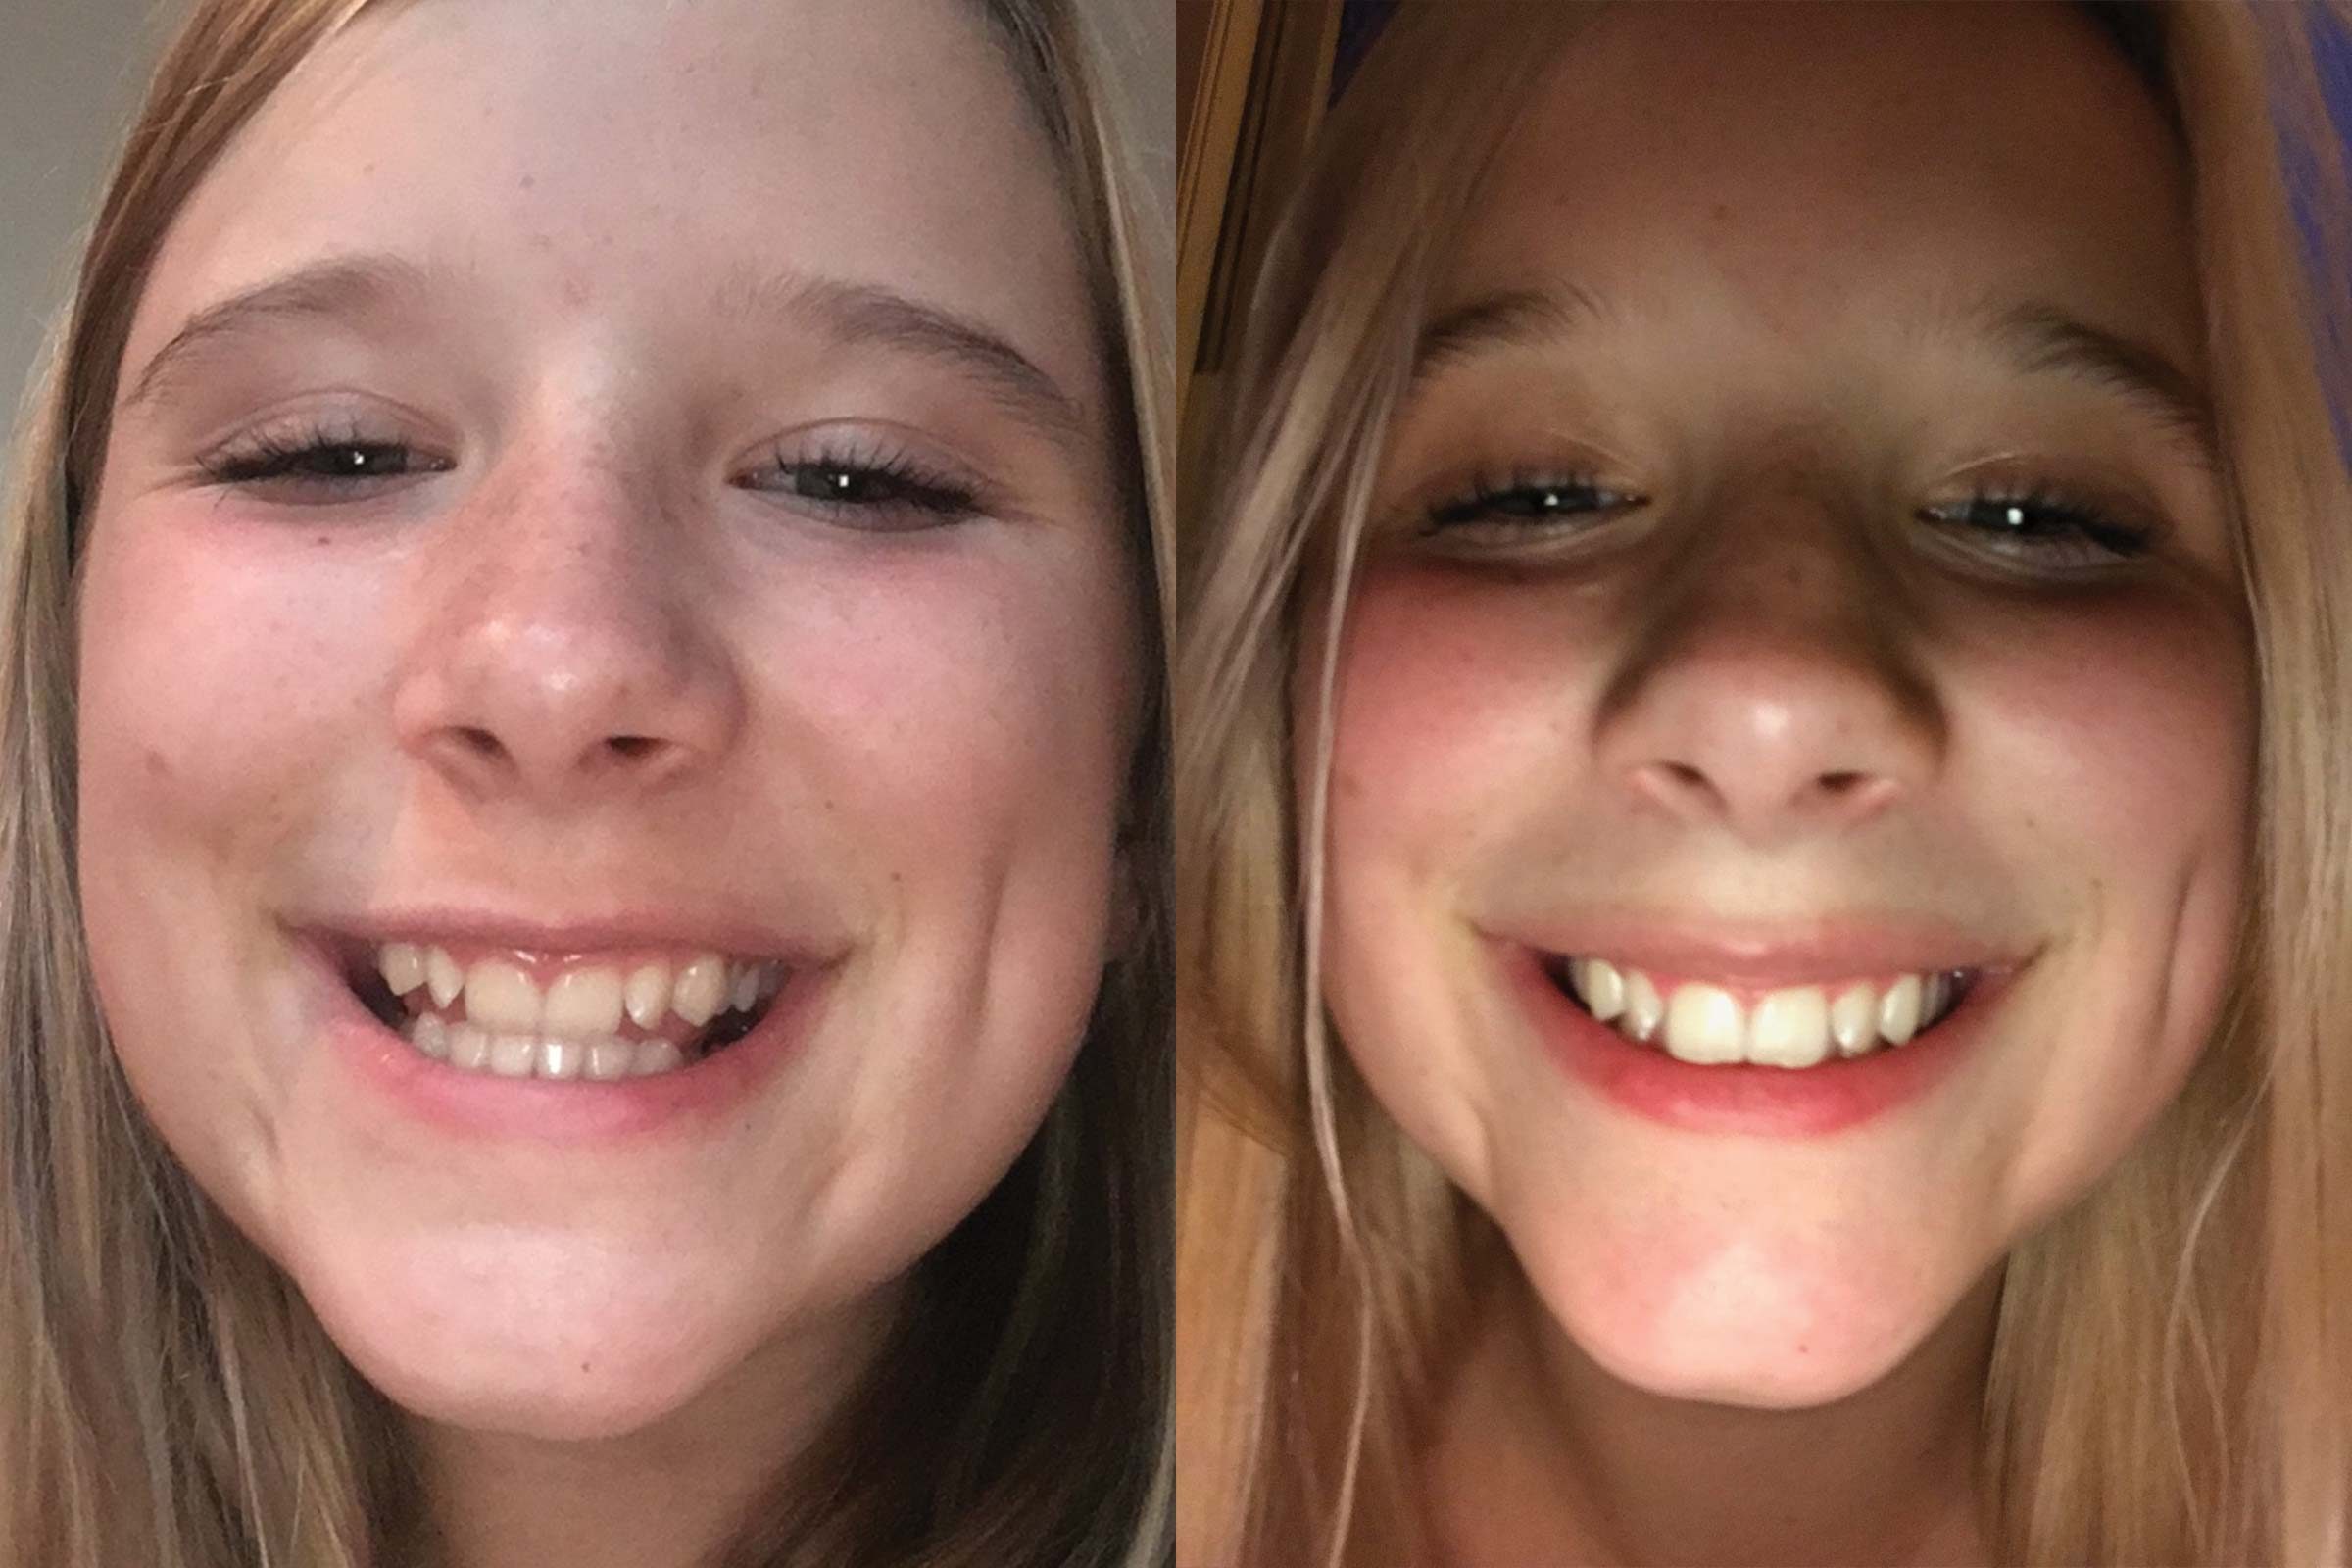 How I Straightened My Teeth Without Braces